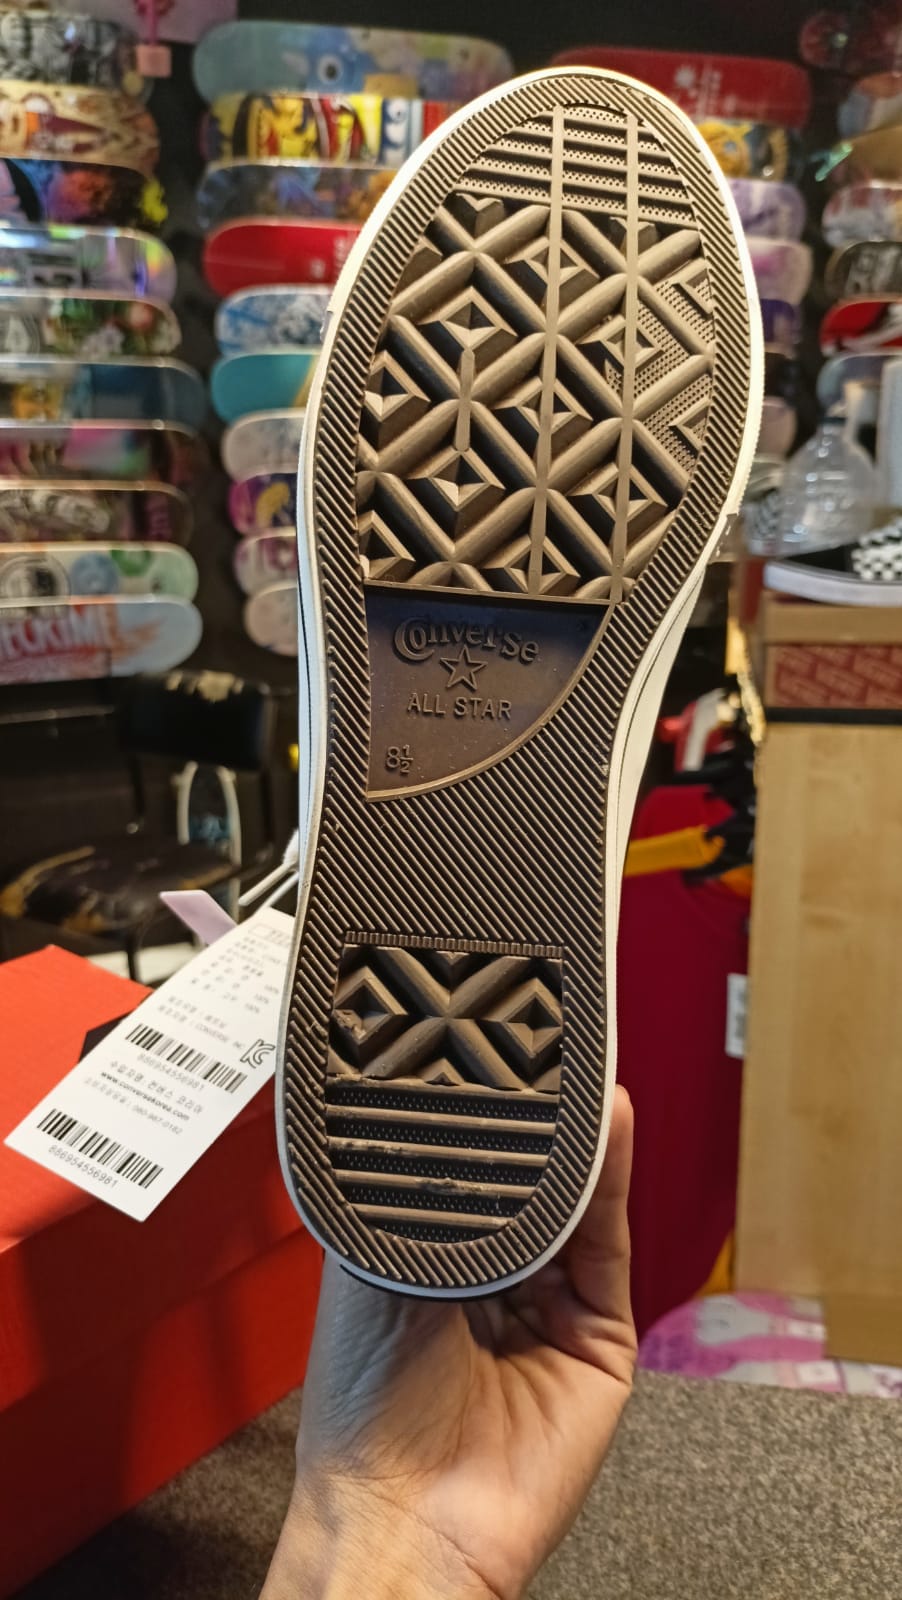 Outsole: The outsole is made of rubber, and the shoe has a thick outsole.